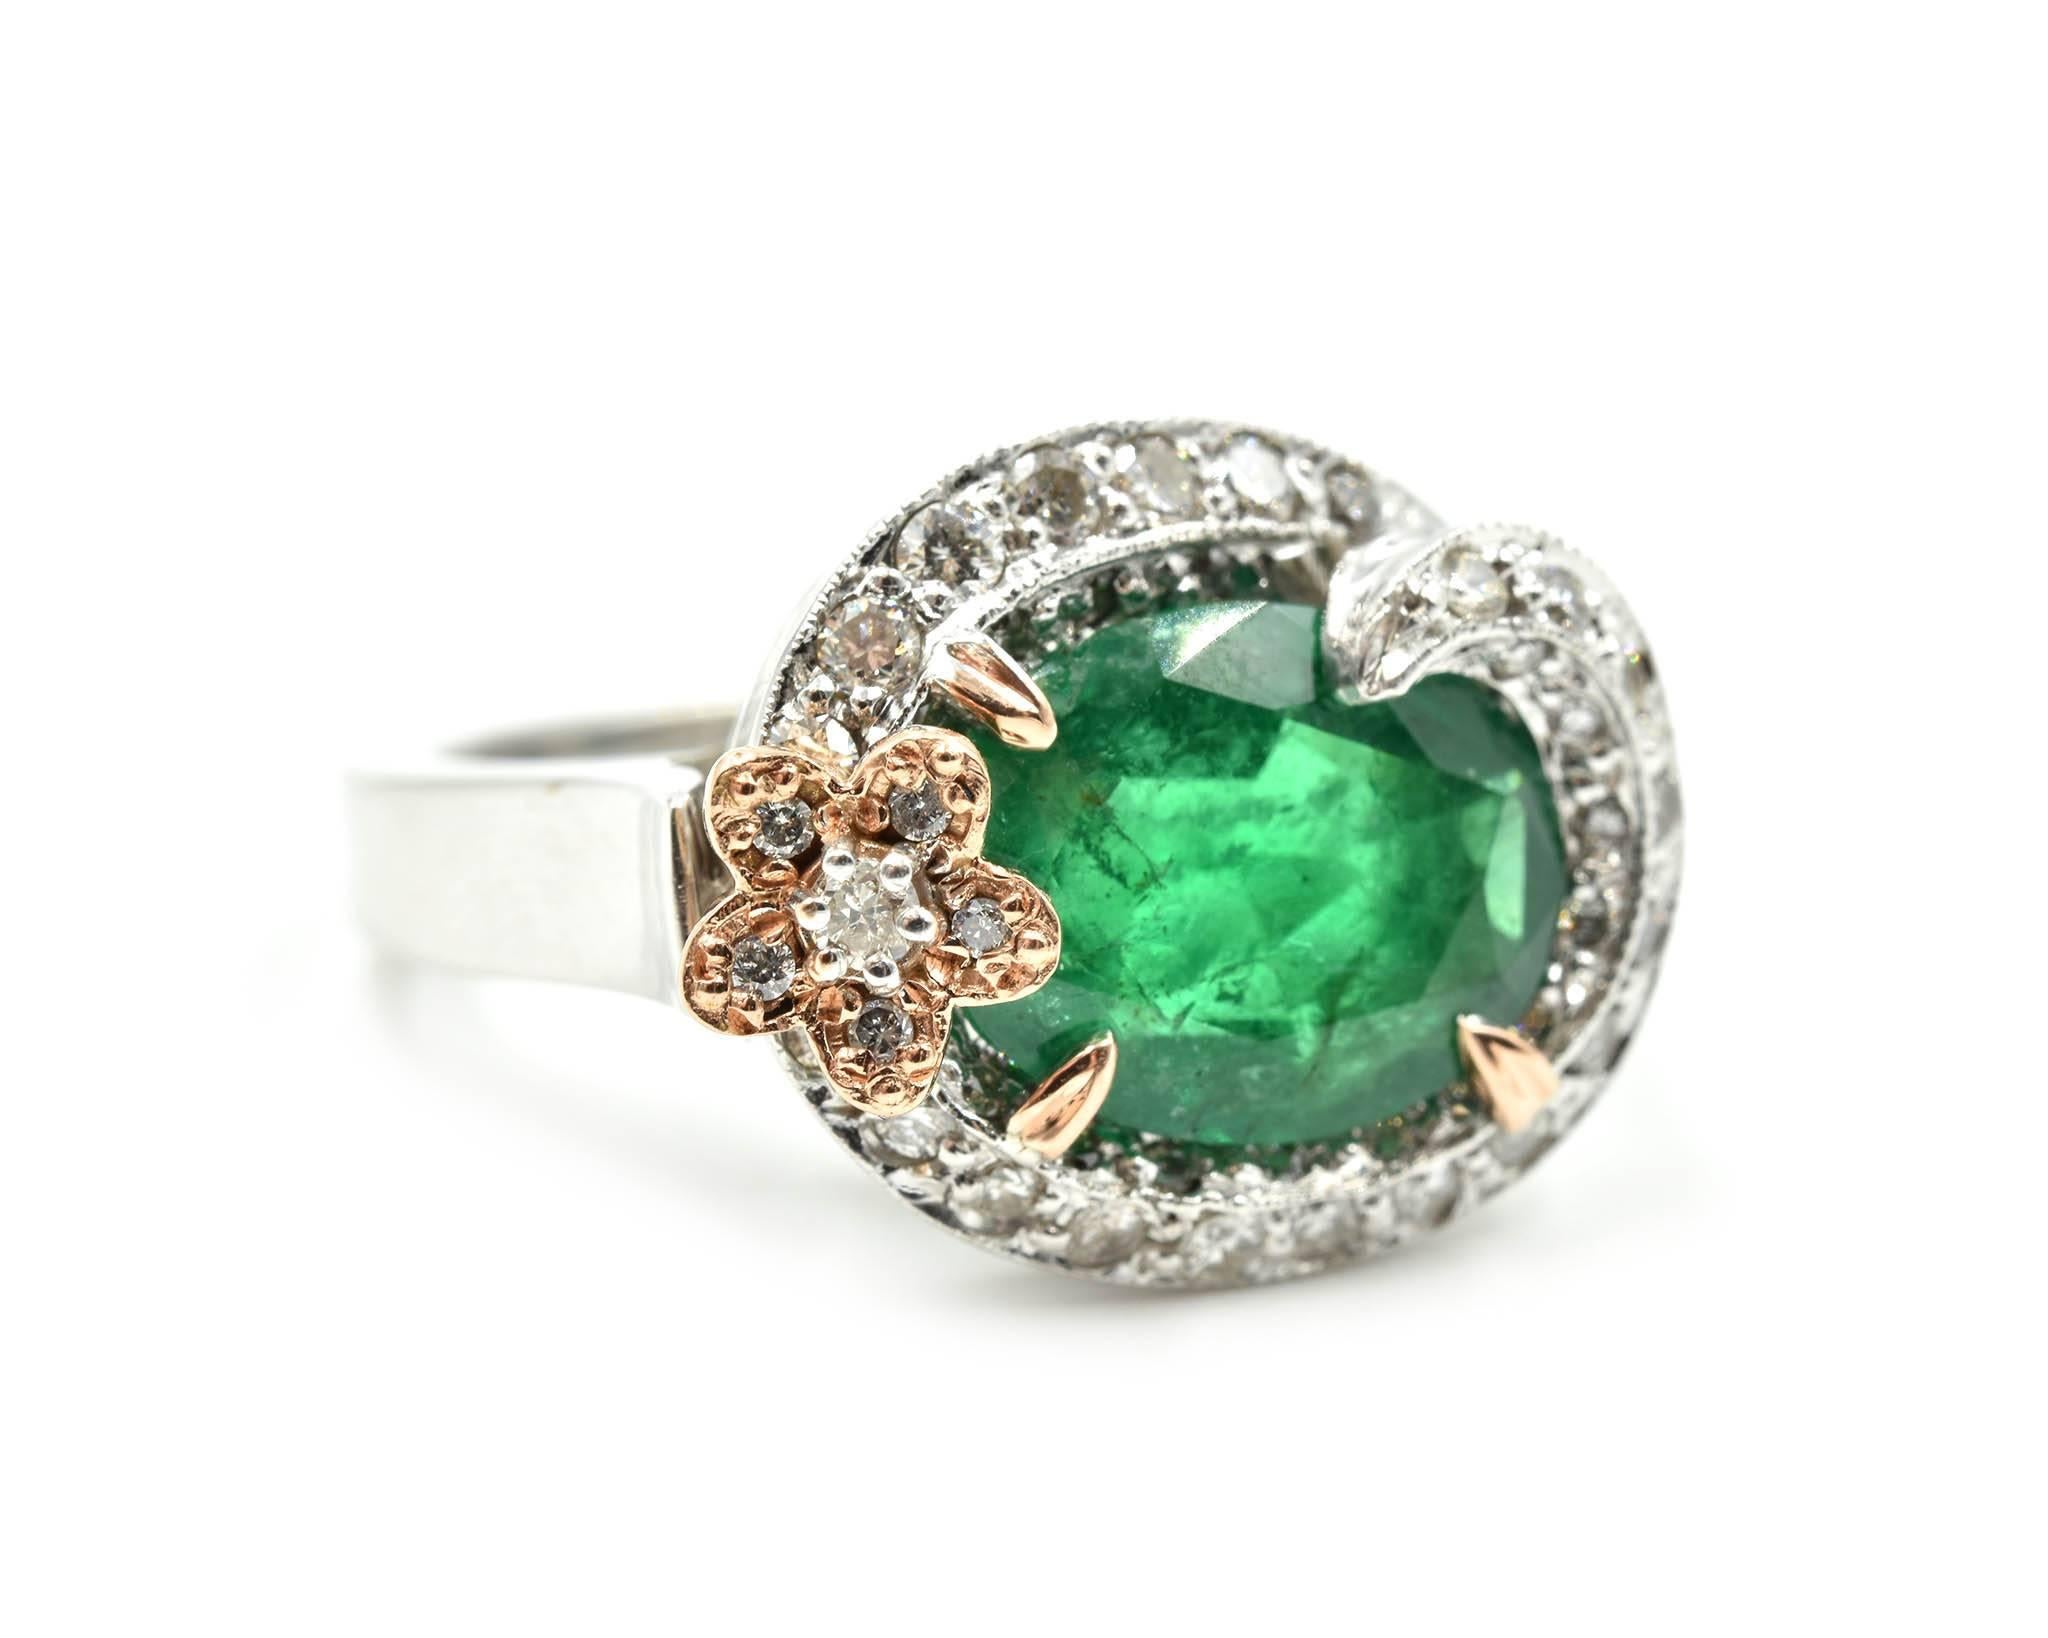 Designer: custom made
Gemstone: oval cut 3.11 carat emerald
Diamonds: 0.81 total carat weight
Clarity: SI
Color: H-I
Material: 14k white & rose gold
Ring size: ring size is currently a 6, please allow two extra shipping days for sizing